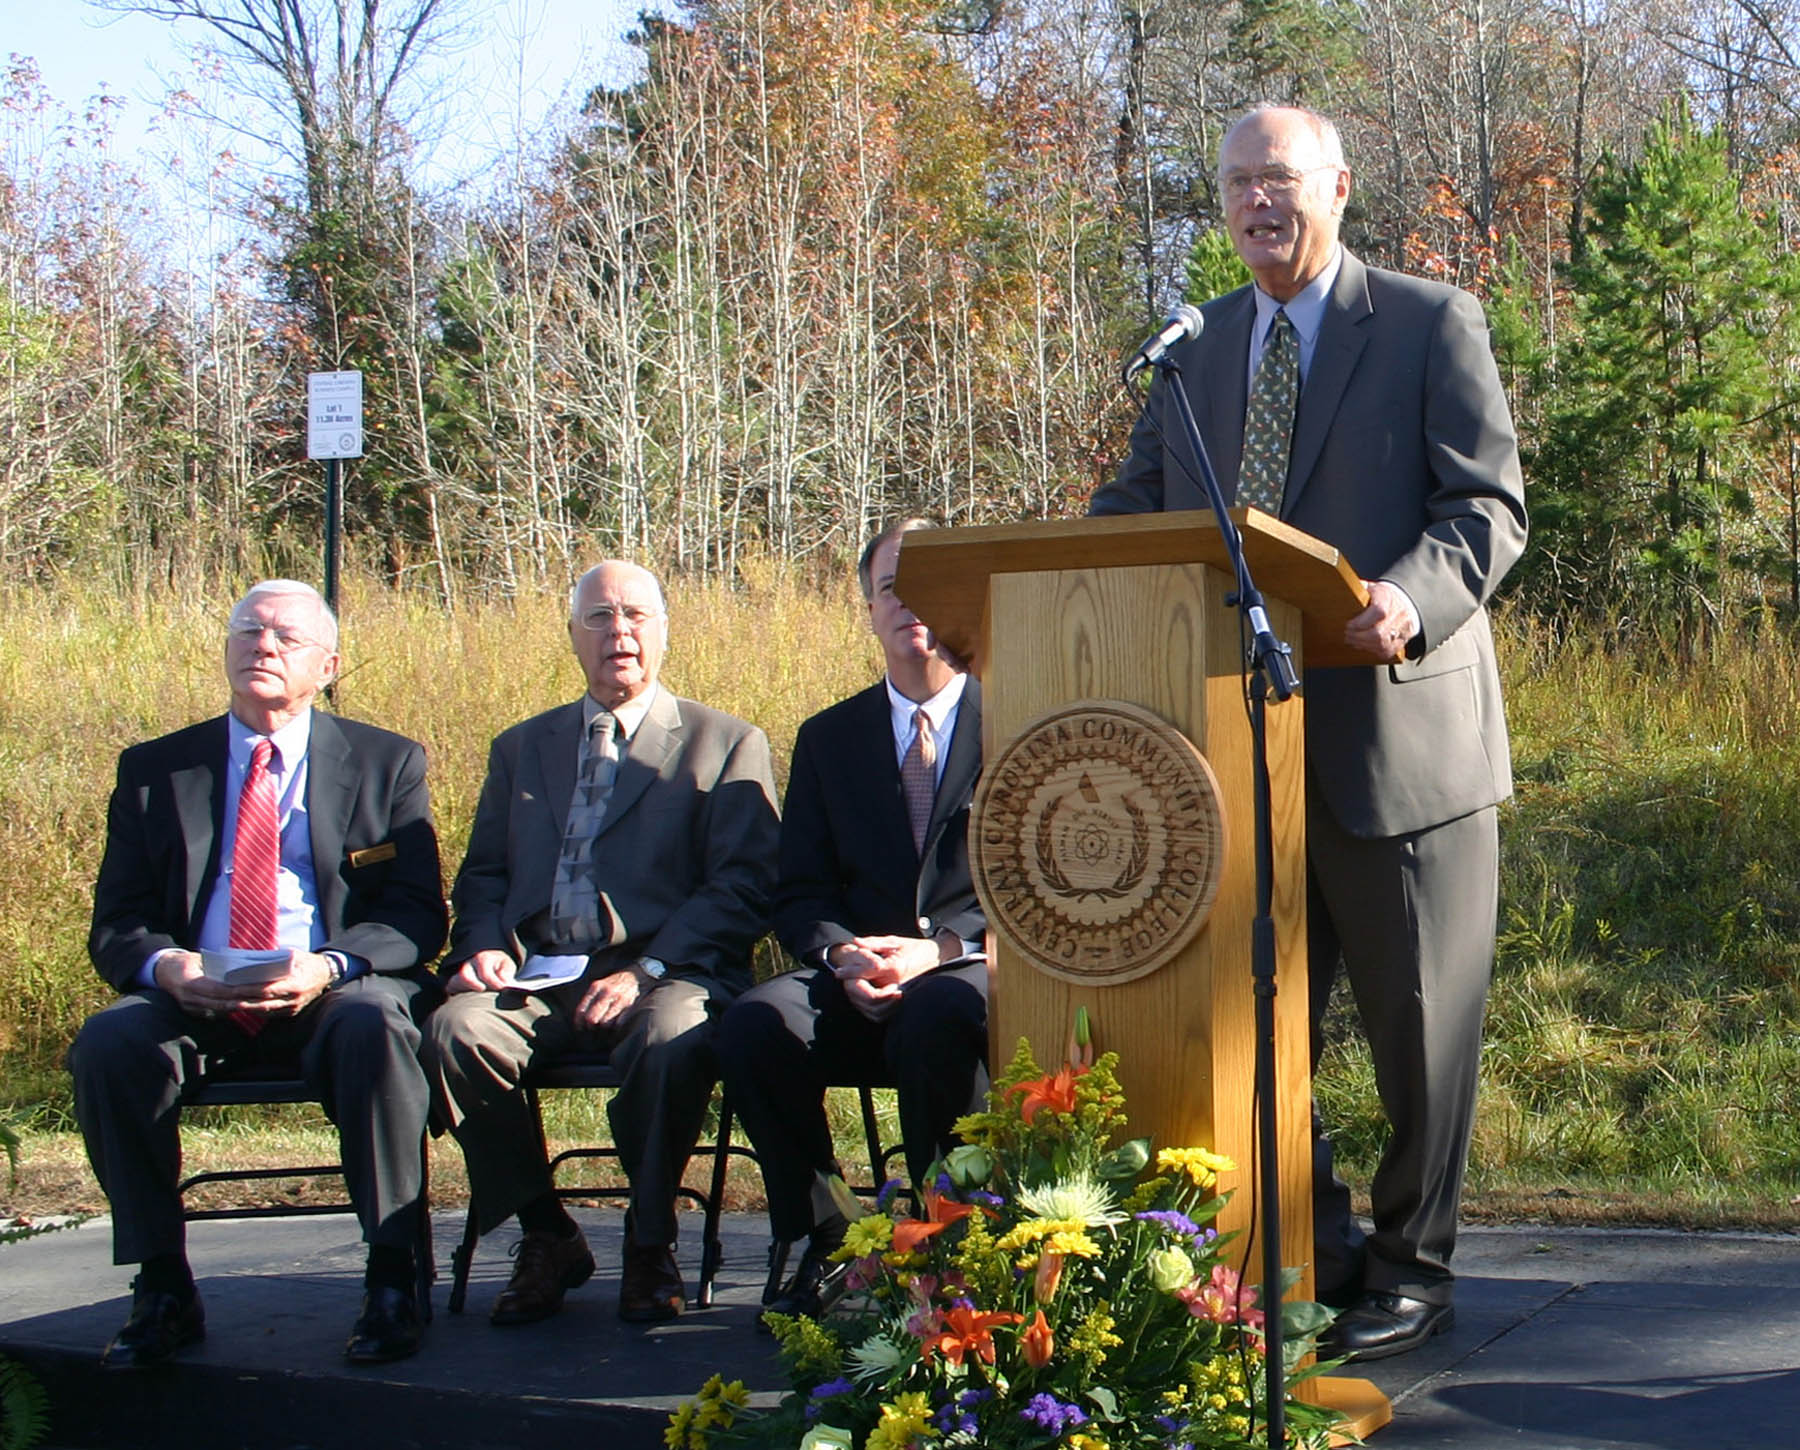 Click to enlarge,  George Lucier, chairman of the Chatham County Board of Commissioners (at podium) addresses those gathered for the groundbreaking ceremony for Central Carolina Community College&#8217;s new Siler City Center. Lucier is also a trustee of the college. The 23,800-square-foot Center, being built in the Central Carolina Business Campus, will enable the college to expand educational opportunities and workforce training for the residents of Siler City and western Chatham County. Also speaking at the groundbreaking were (from left) Bobby Powell, chairman of the Central Carolina Community College Board of Trustees; Charles Turner, mayor of Siler City; Central Carolina Community College President Bud Marchant; and Dianne Reid, president of Chatham County Economic Development Corporation. 